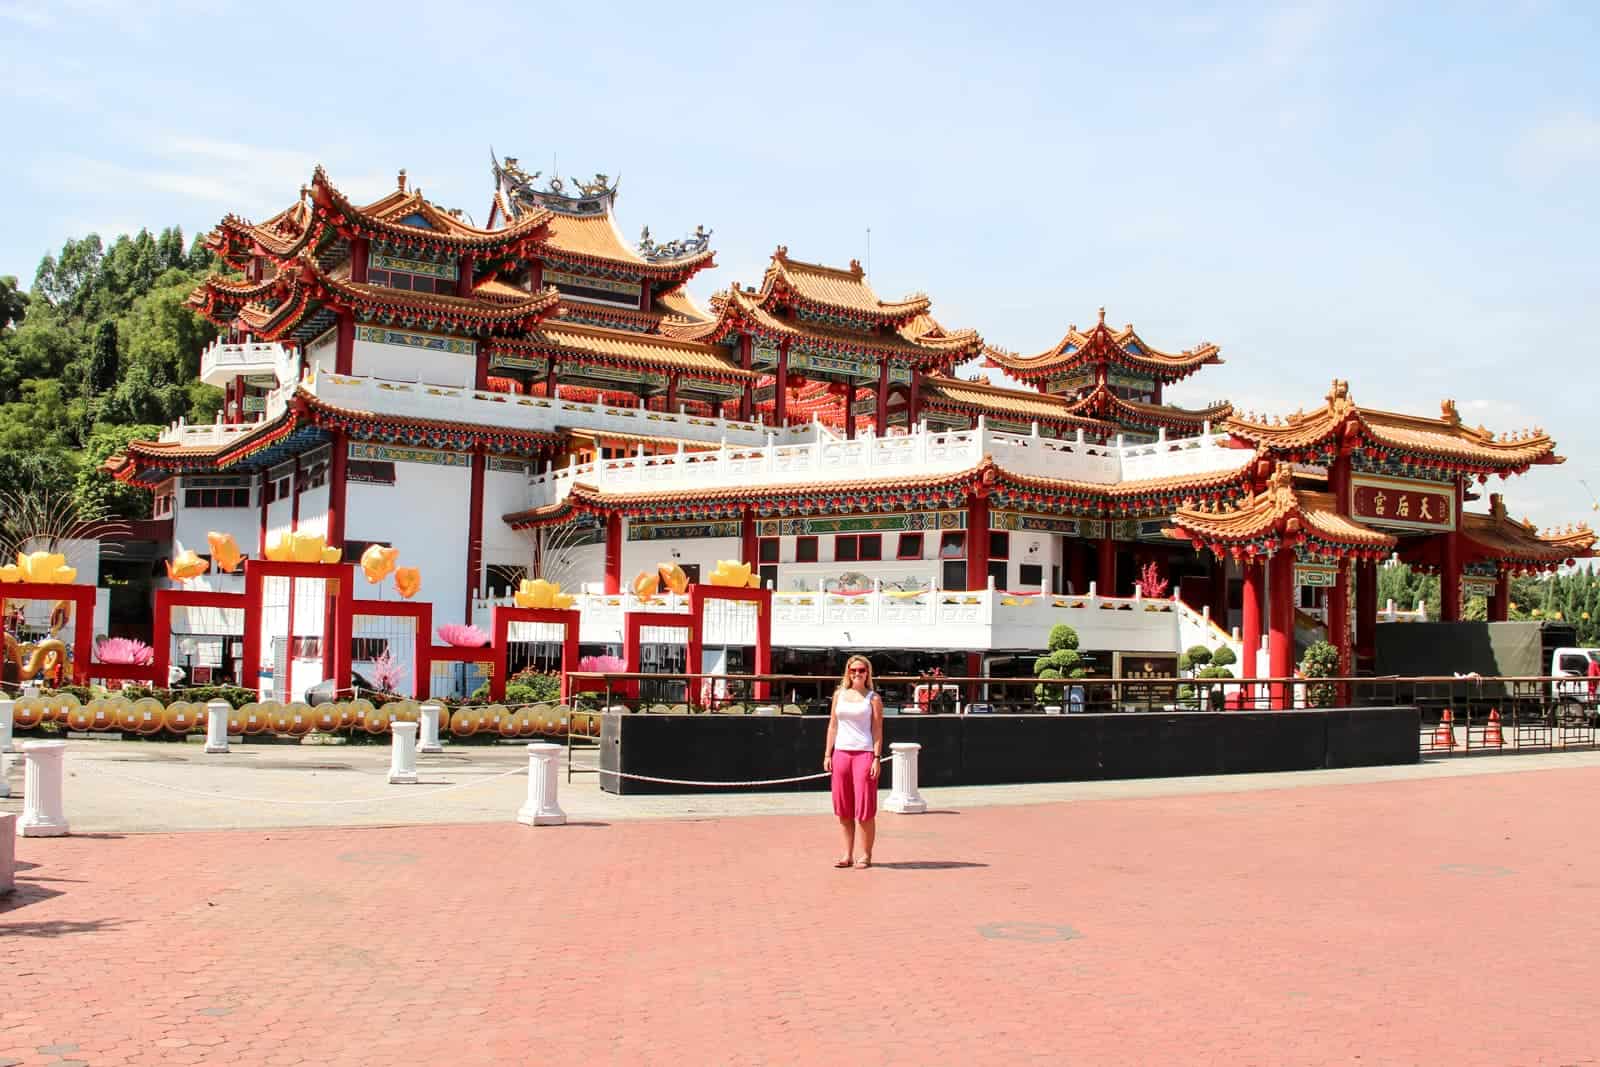 Visiting the Thean Hou Temple for things to do Kuala Lumpur